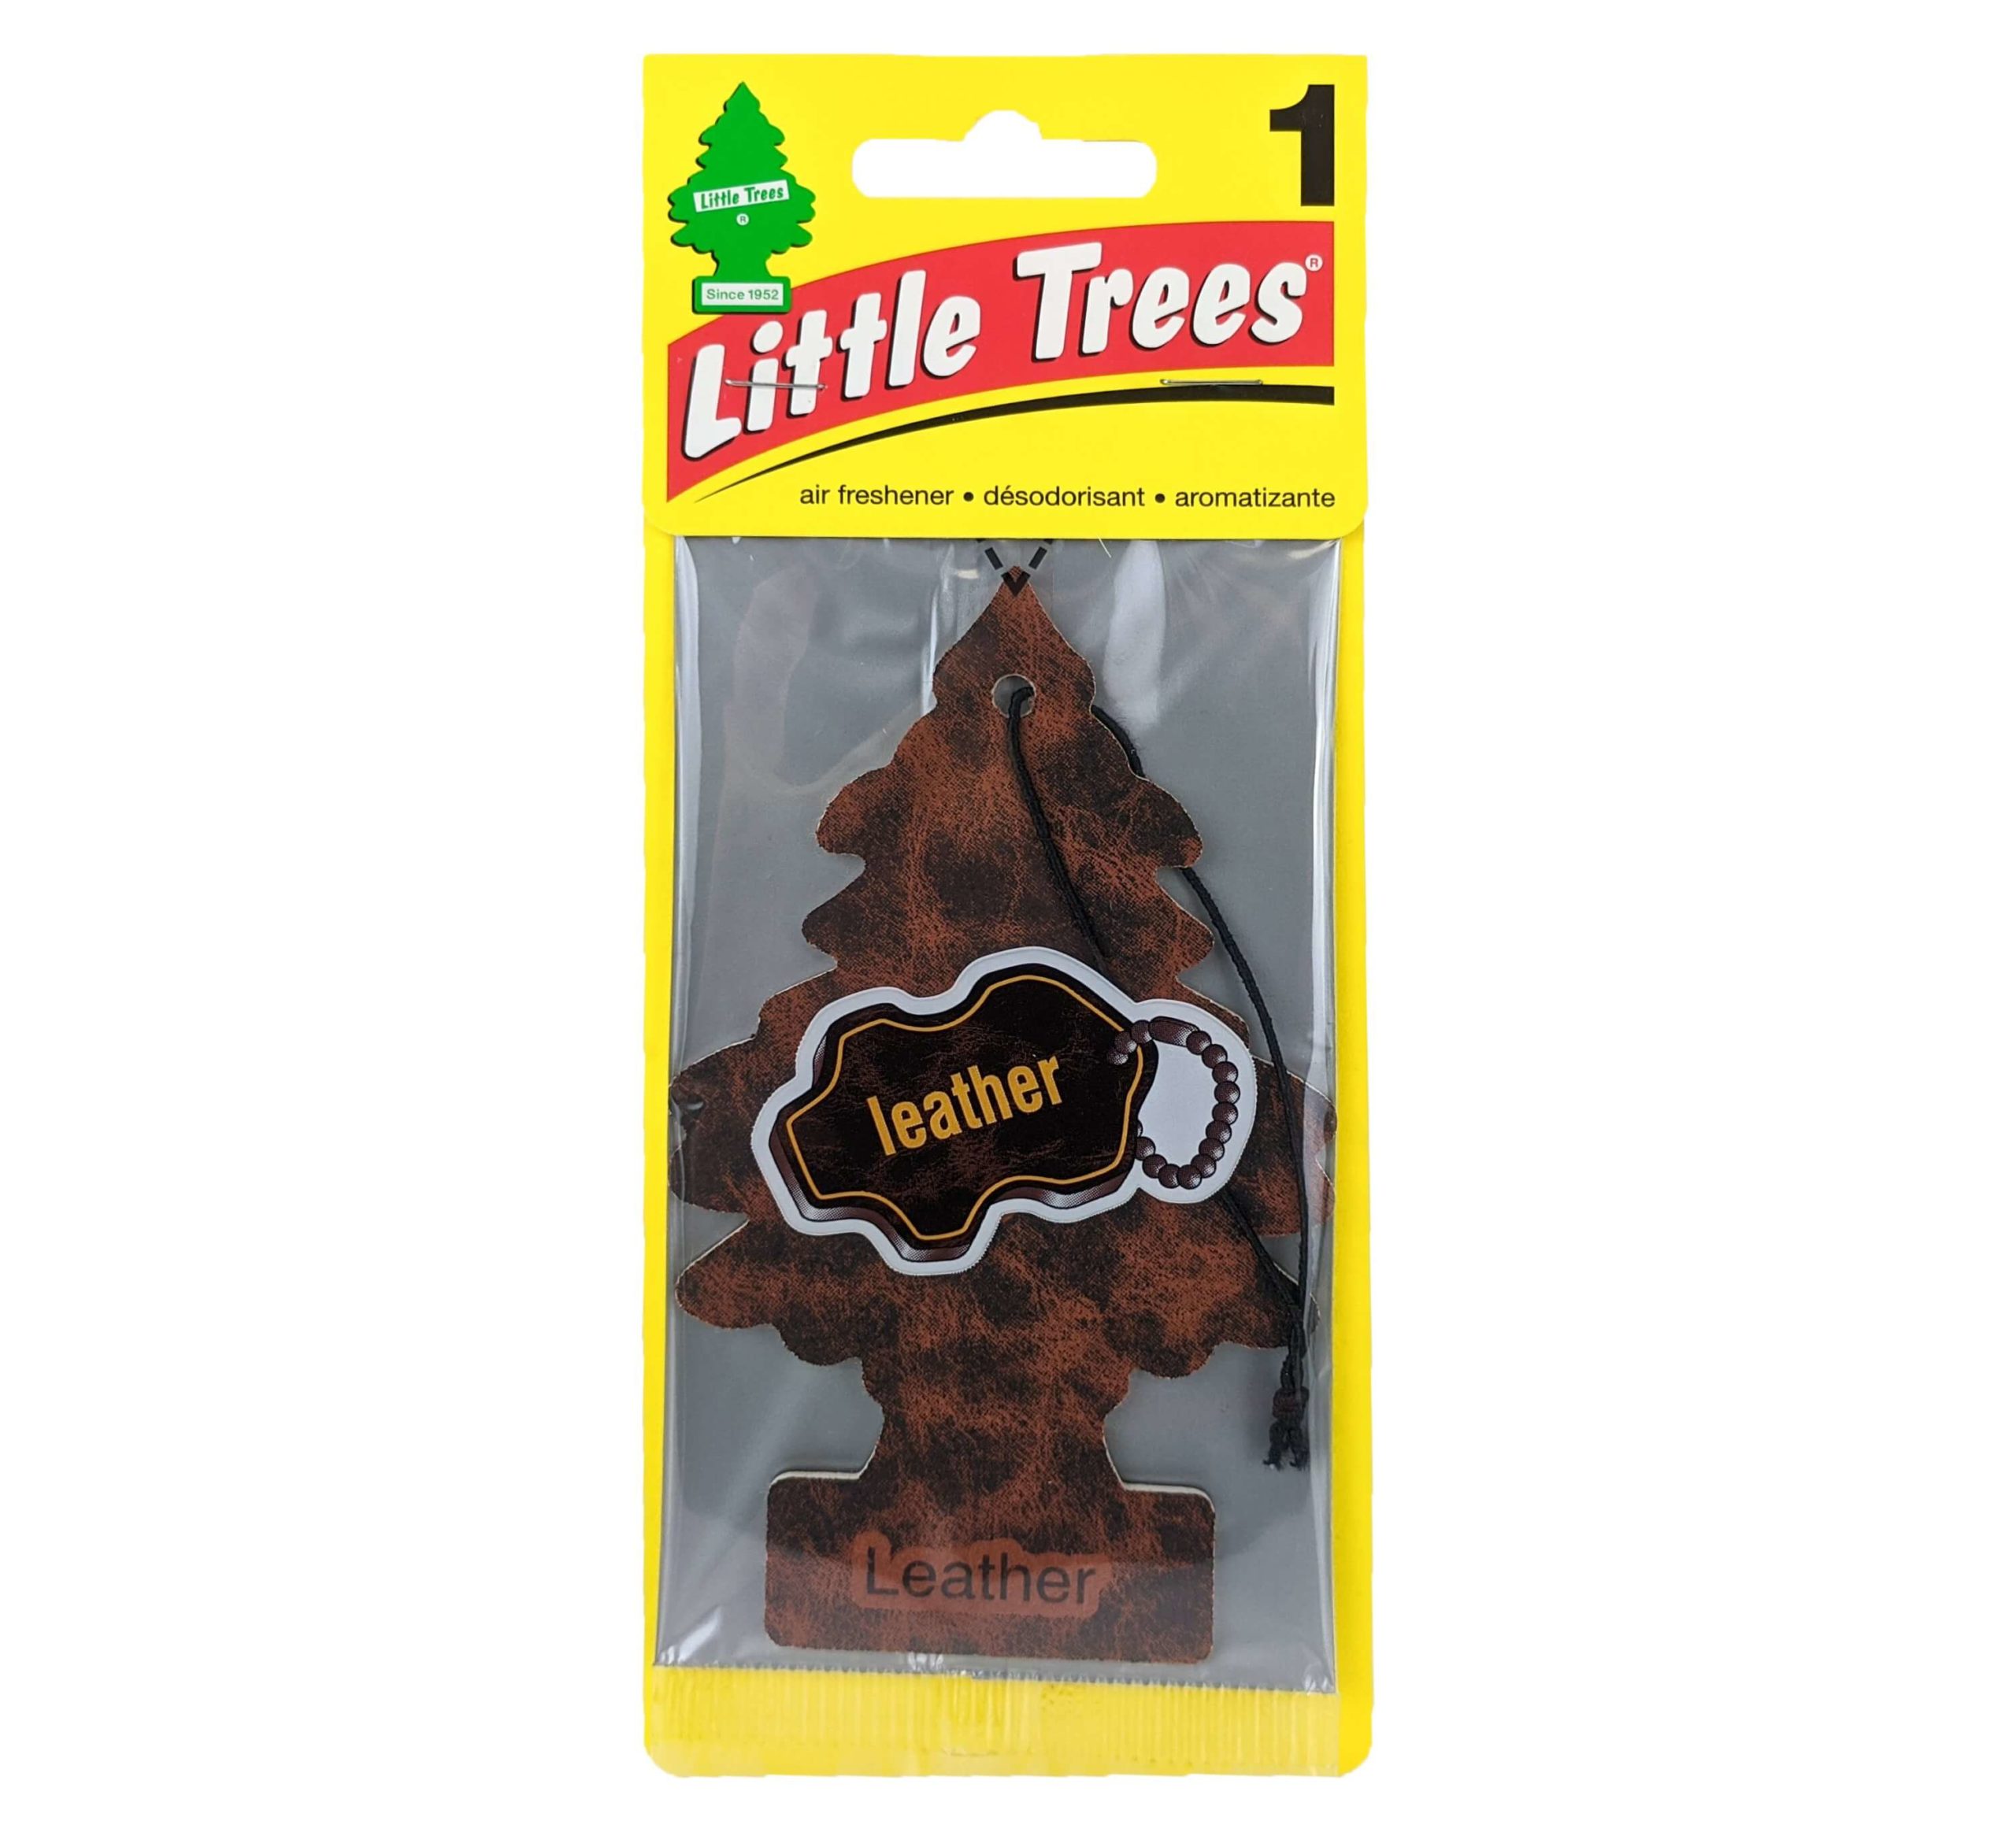 Little Tree Leather Scent (Each)